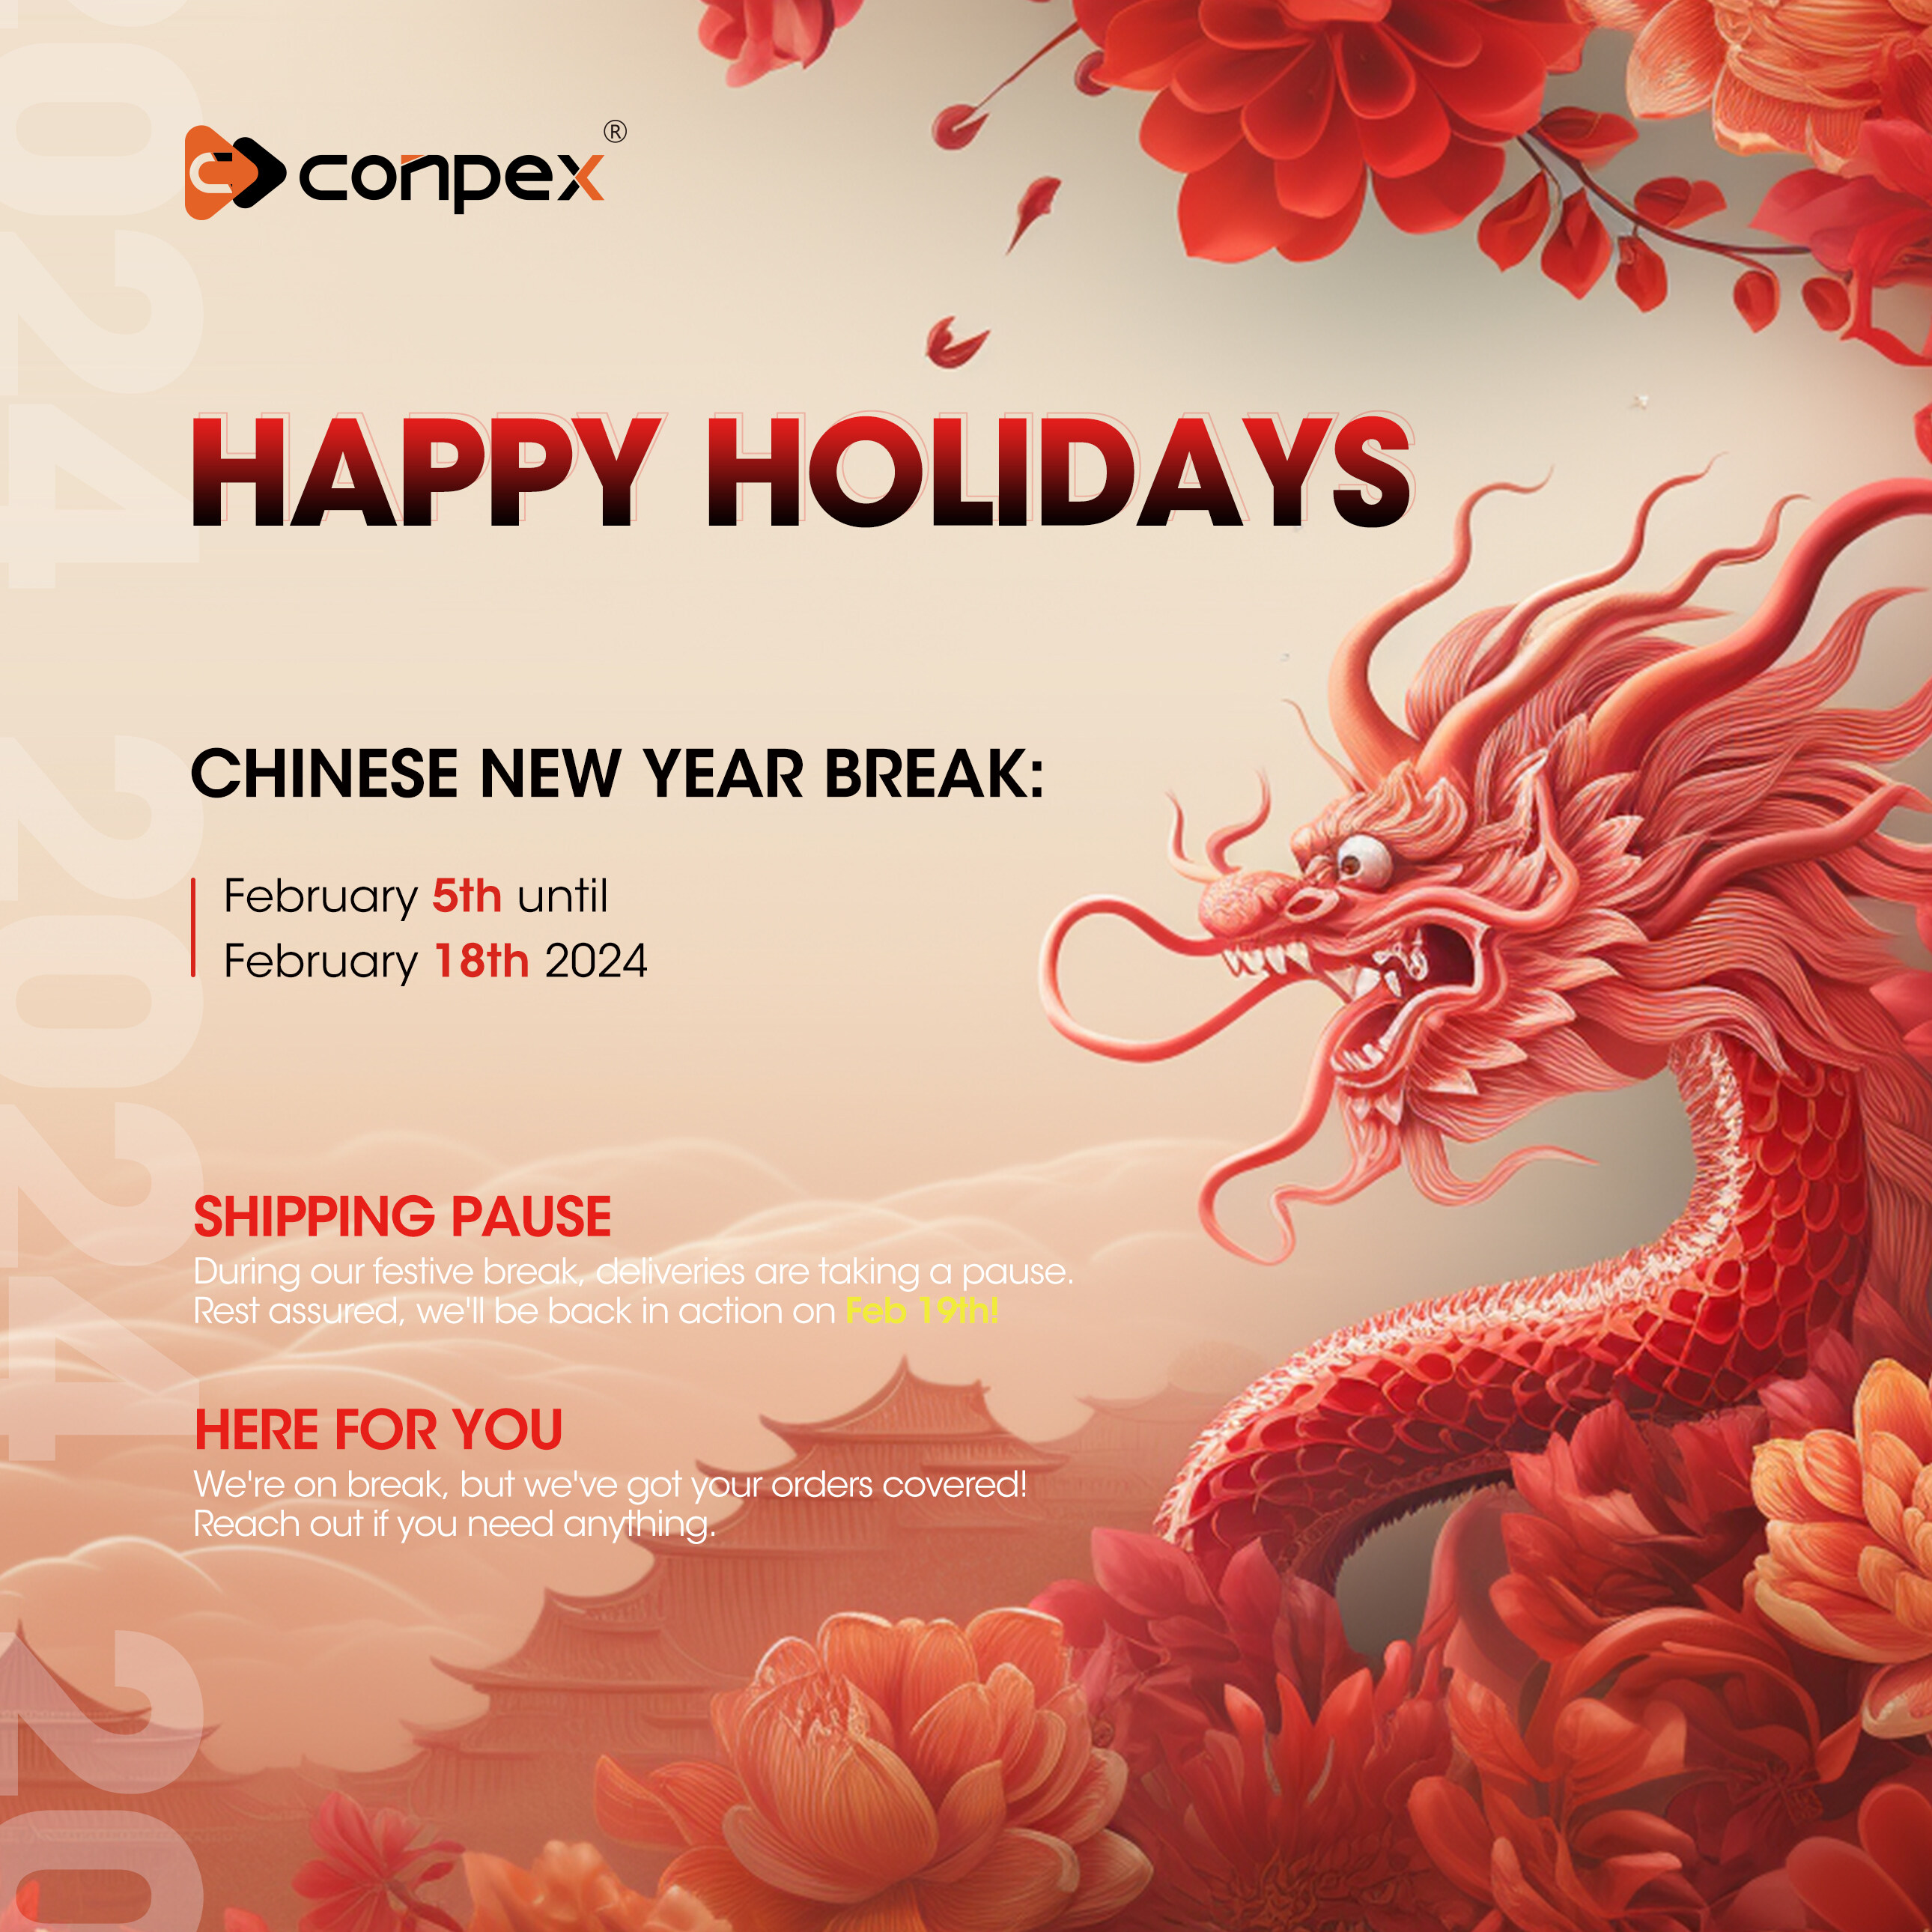 HOLIDAY NOTICE: Celebrating Chinese Lunar New Year with Joy and Brilliance!